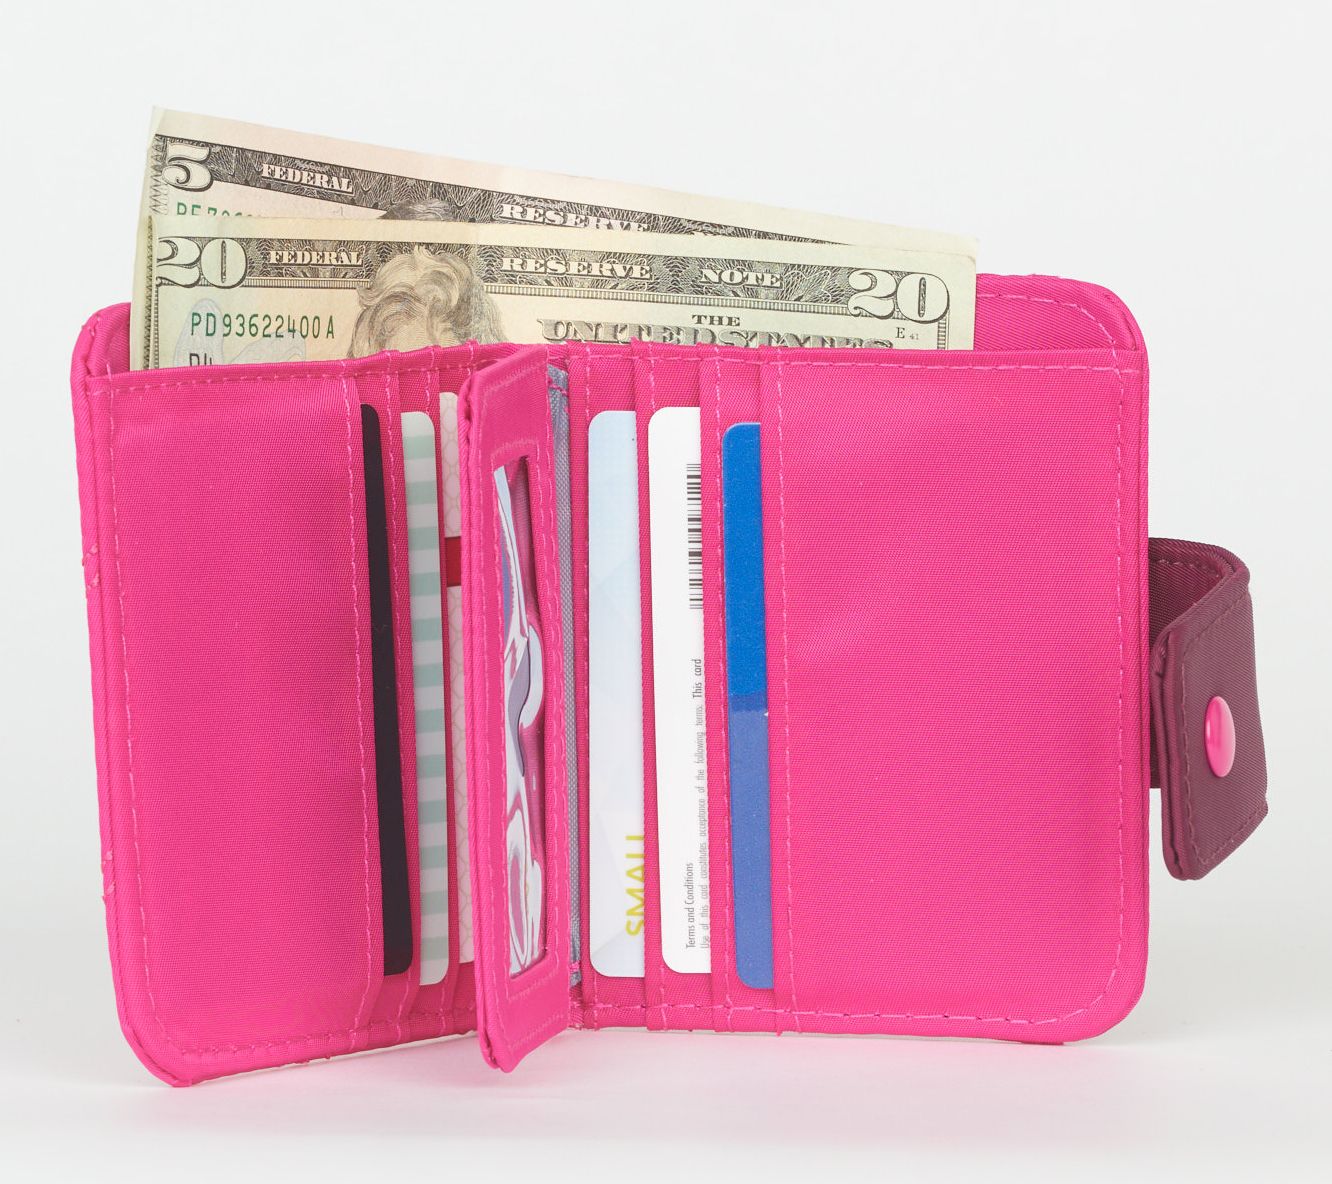 VW RFID Credit Card Pop Up Wallet (with money clip) - ShopVWLifestyle  operated by The Pro Shop Corporate